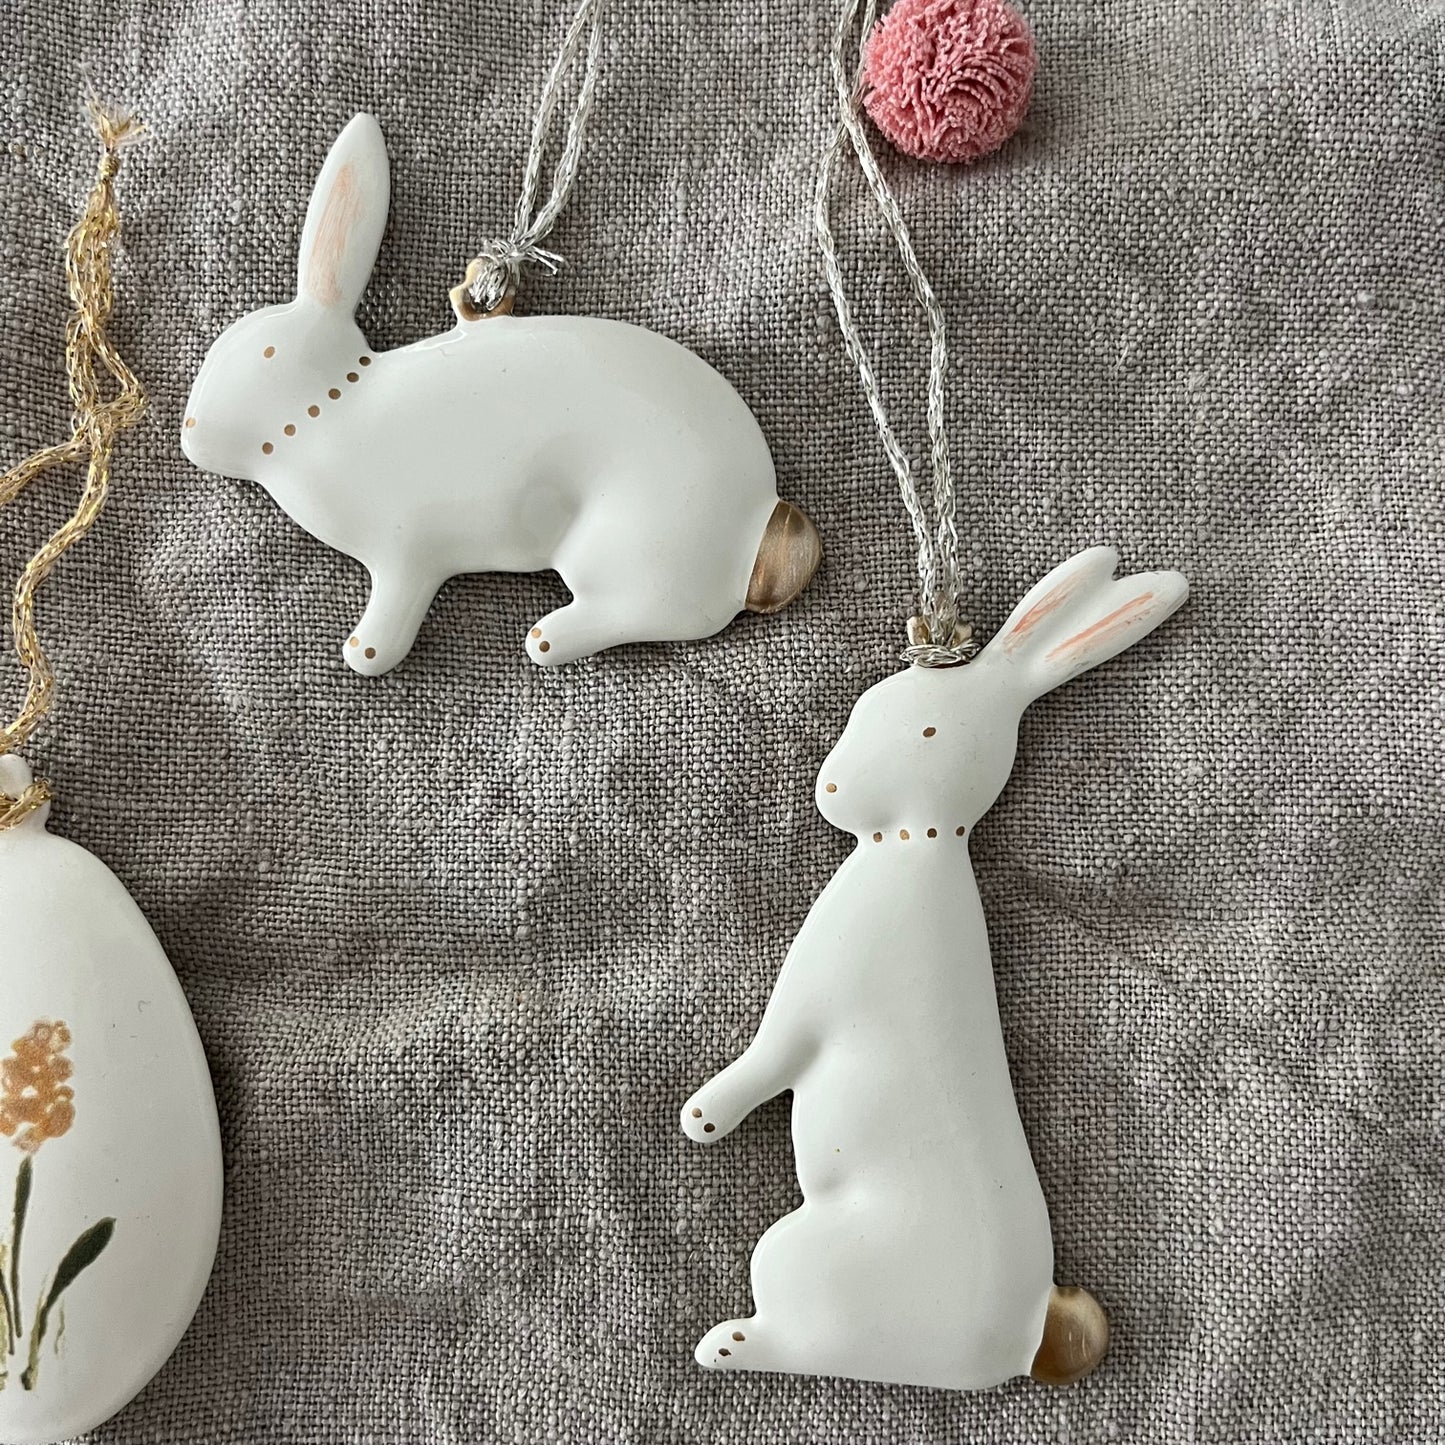 Easter Ornaments